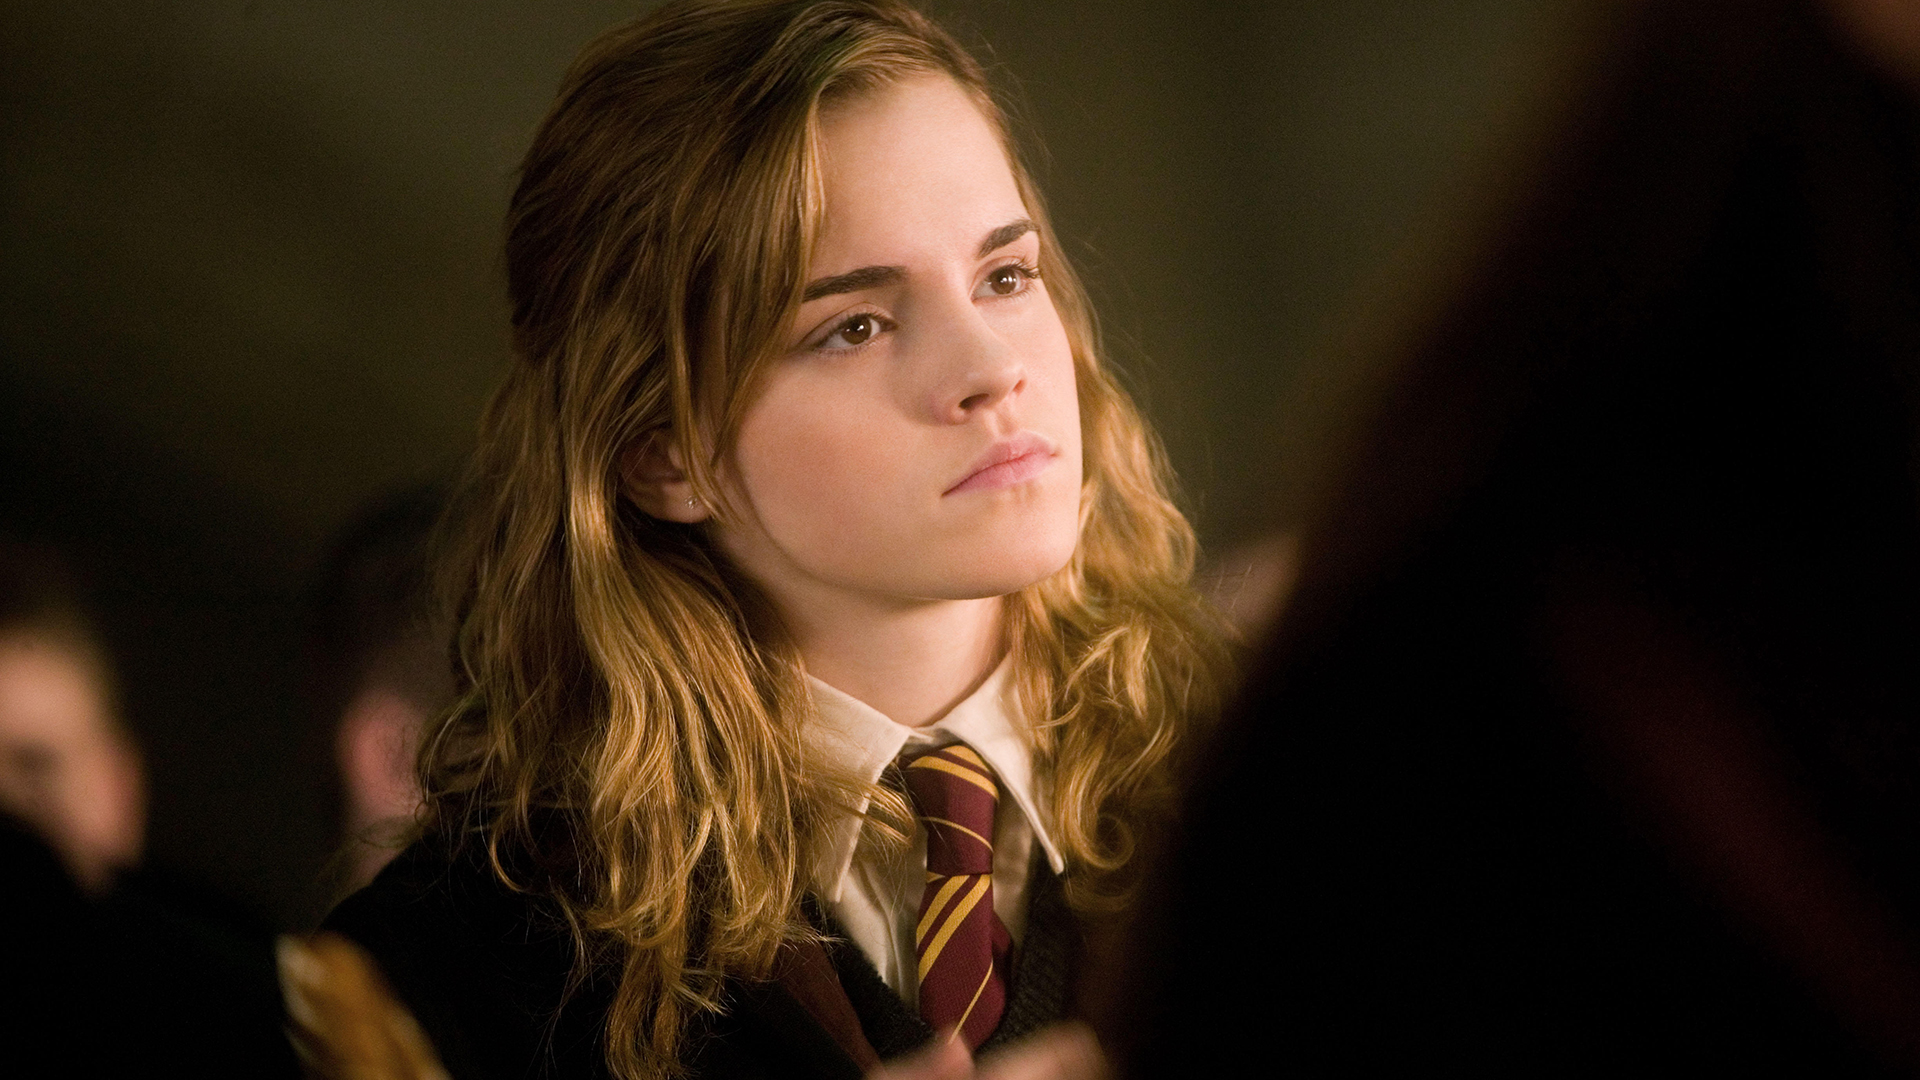 8 Burning Questions About Hermione Granger We Still Can’t Figure Out